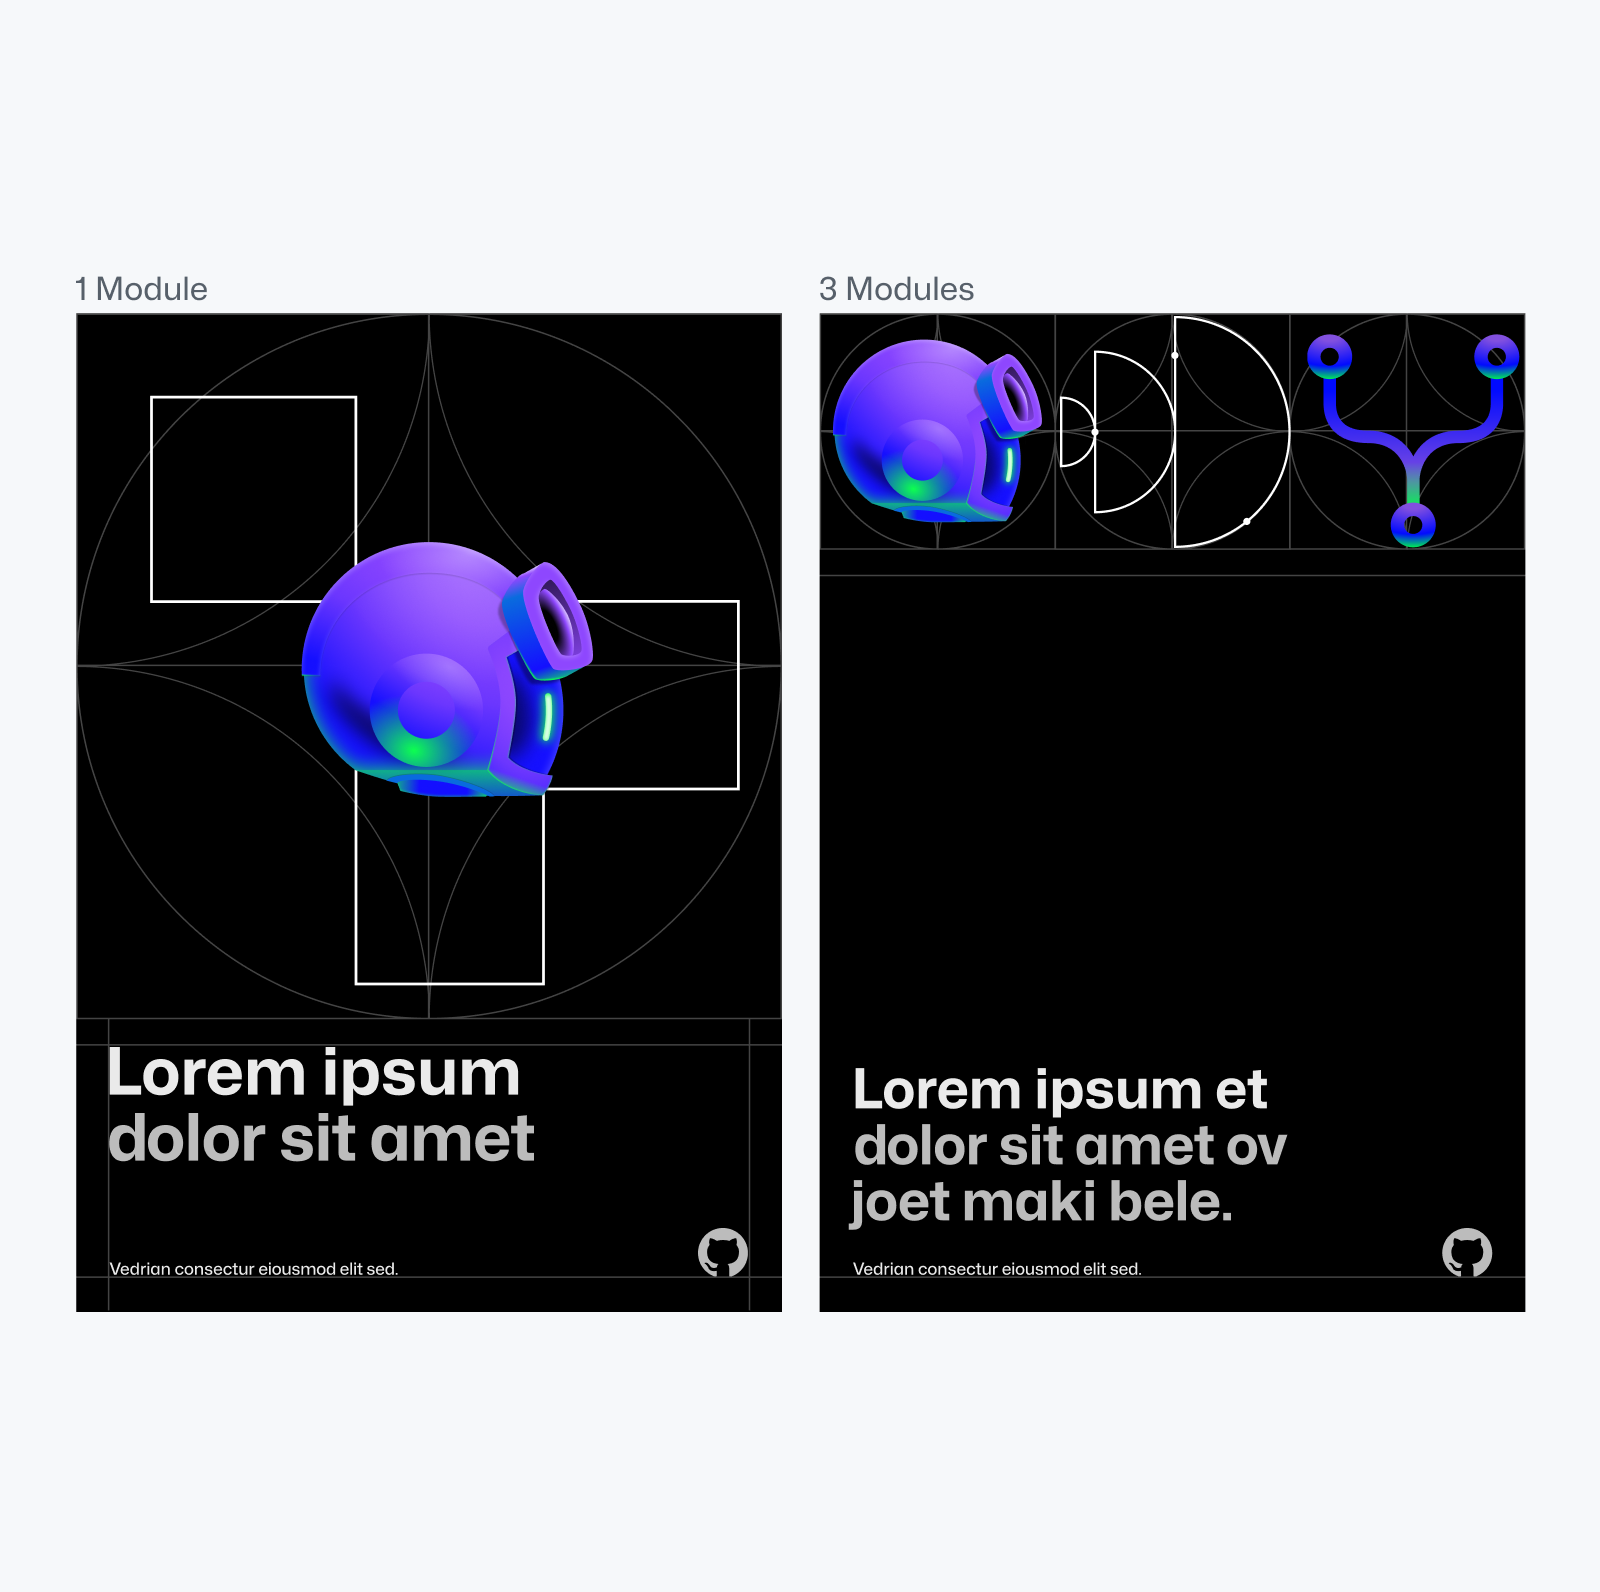 Two black portrait rectangular compositions side by side. Text above them reads "1 module" and "3 modules" respectively. Compositions feature placeholder lorem ipsum text on the bottom in white and light gray, with abstract illustrations on the top.